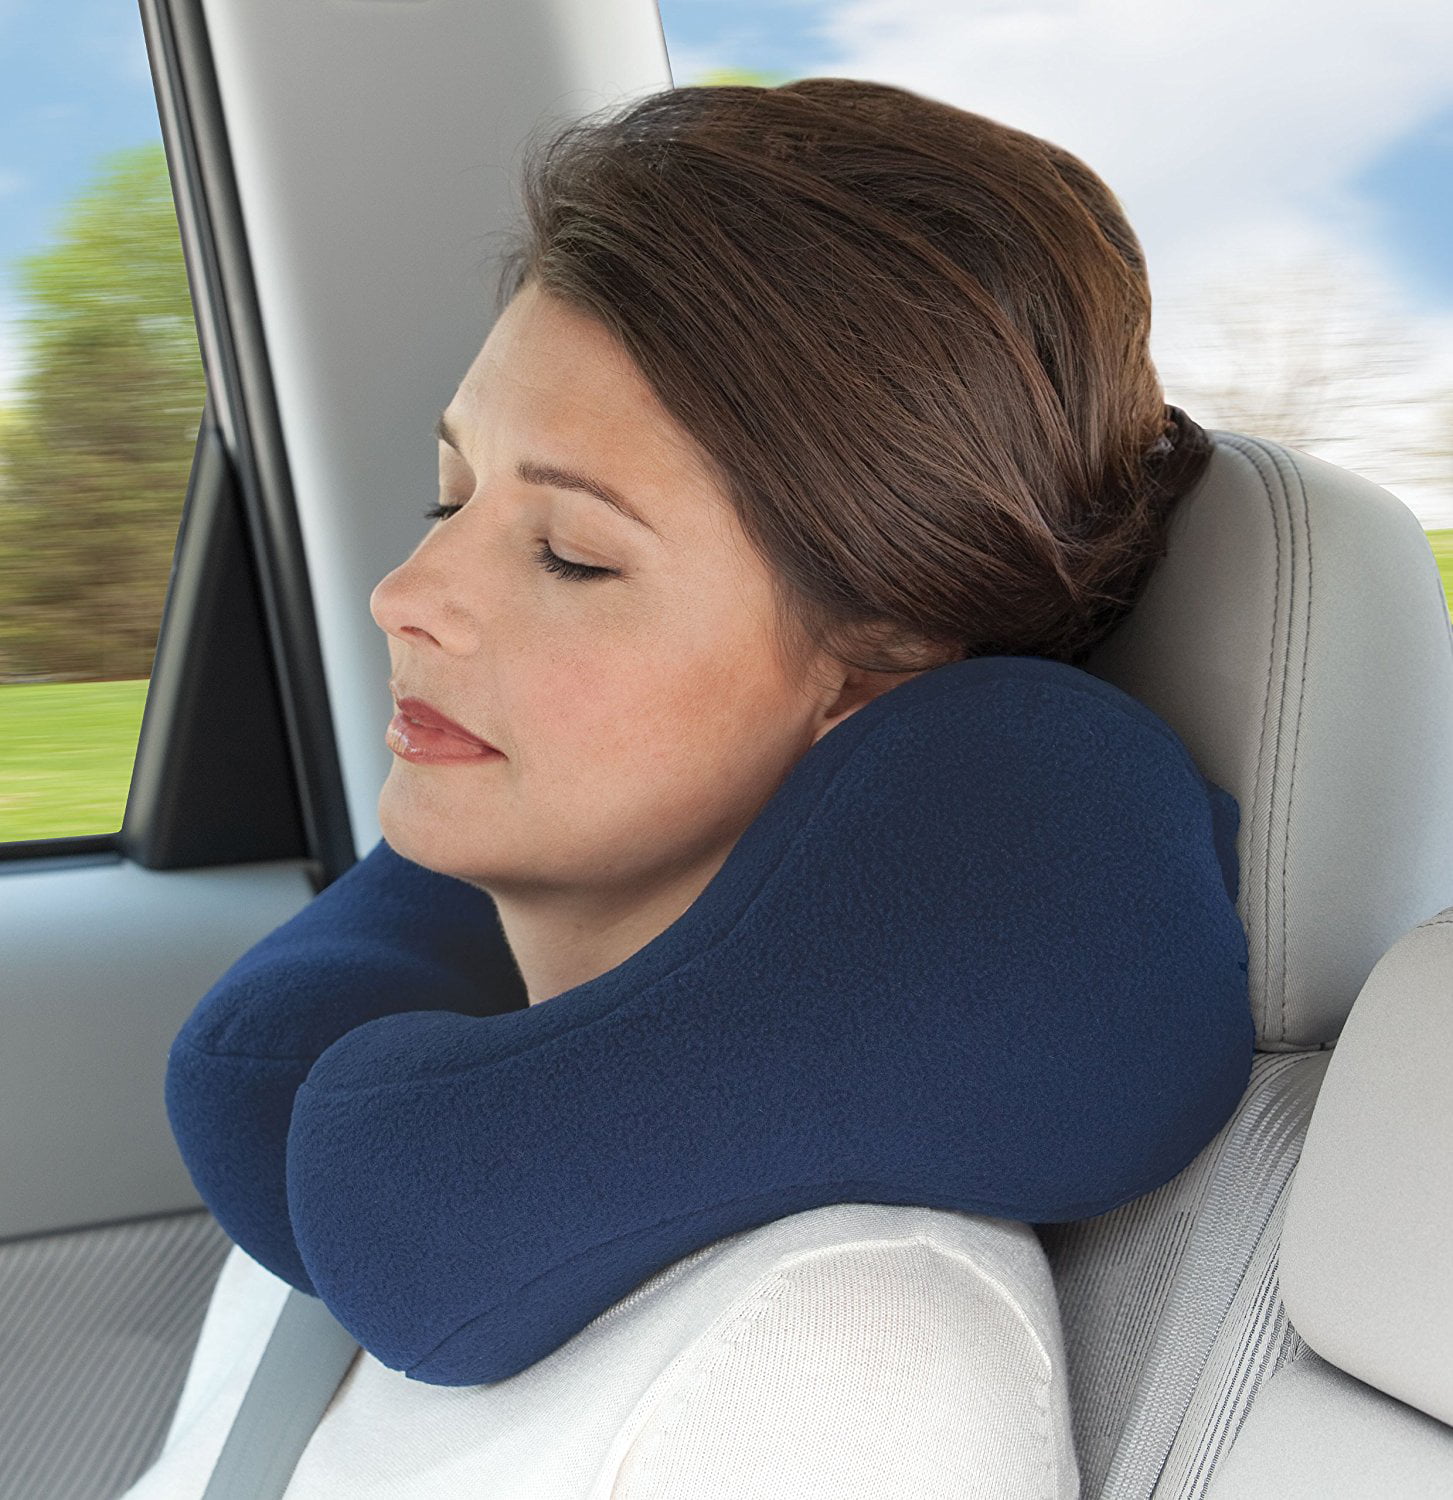 Neck Support Car Pillow Car Neck Pillow Neck Pain Relief Neck Pillow Travel for Airplanes Car Traveling Adoric Life Travel Neck Pillow